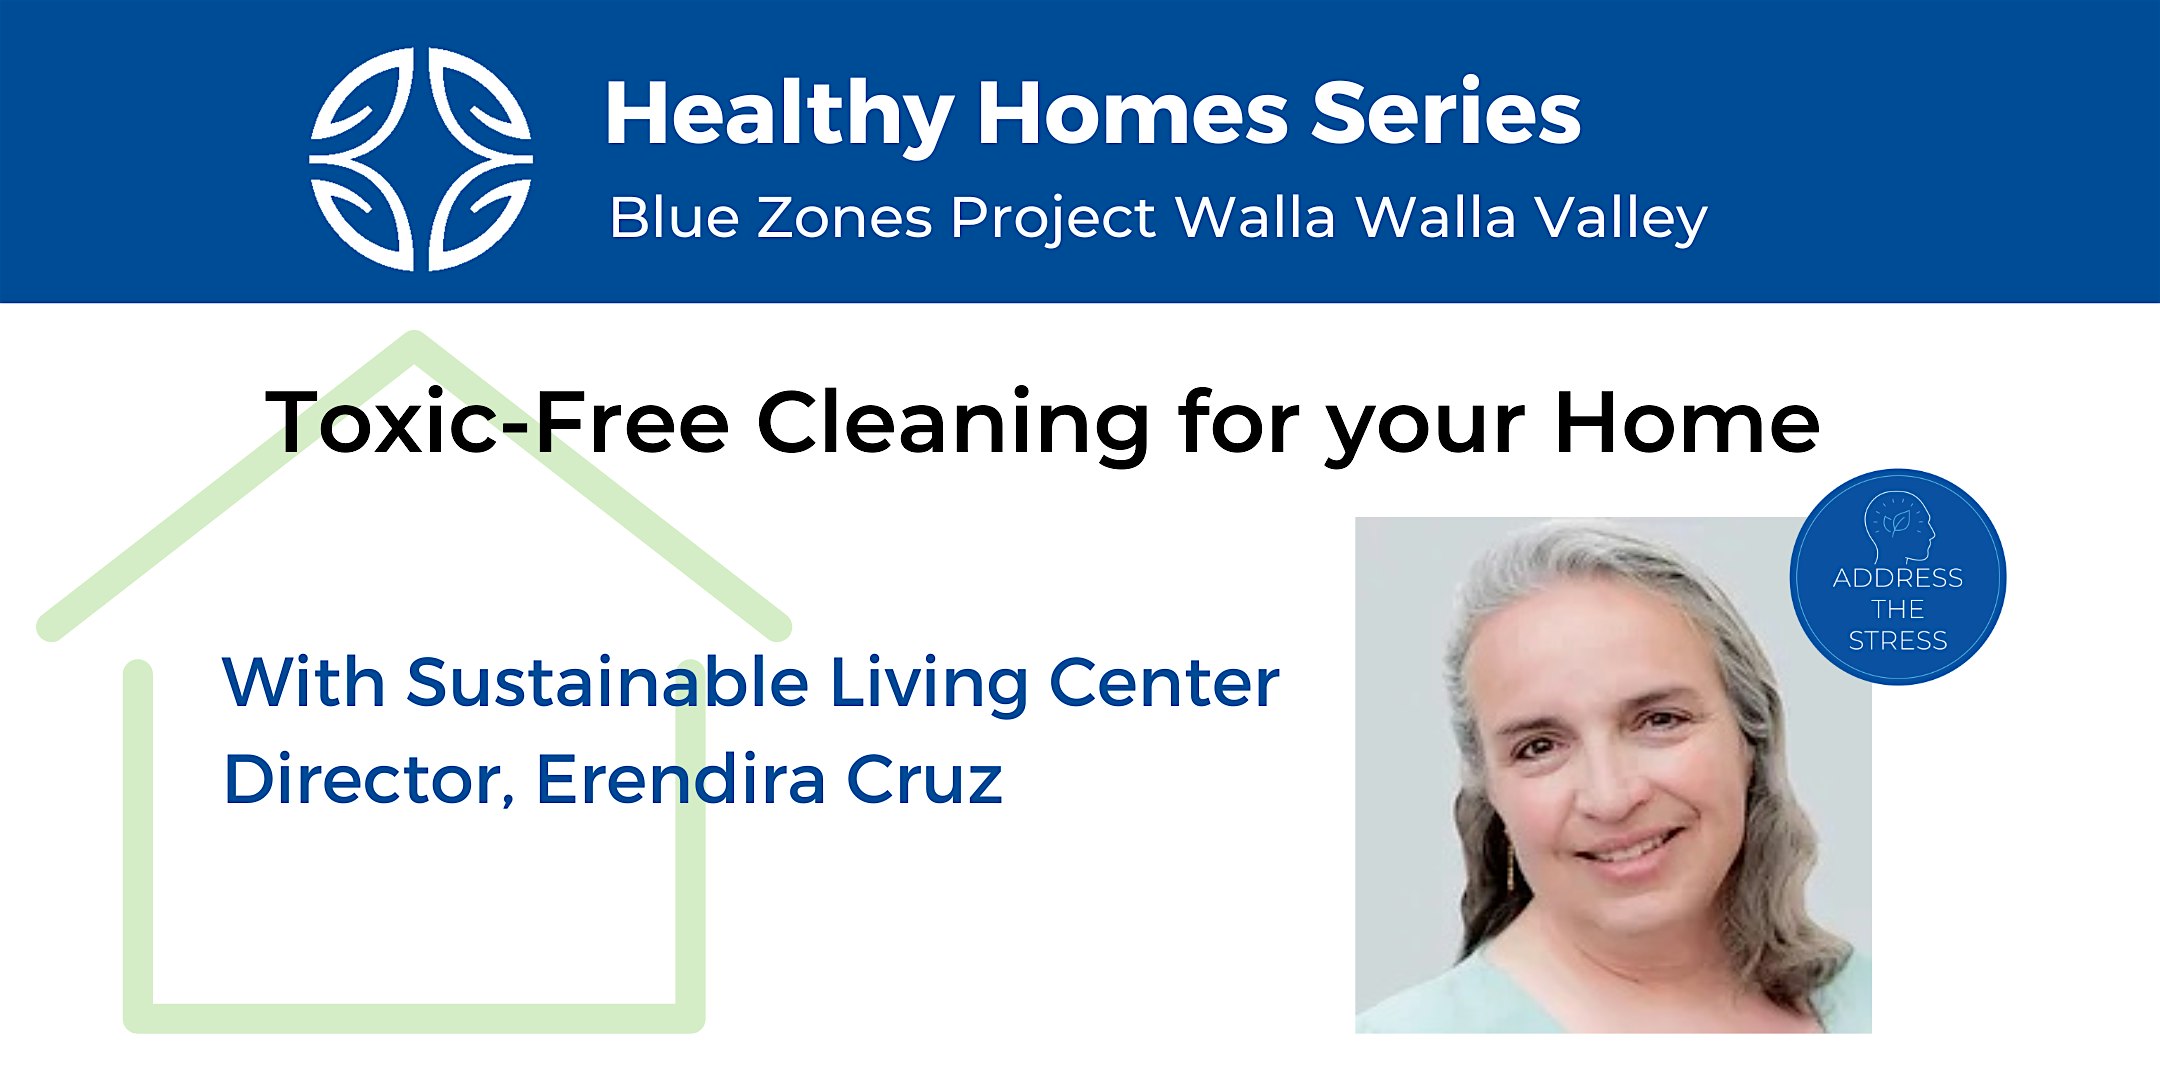 BZP-WWV, Toxic-Free Cleaning for your Home